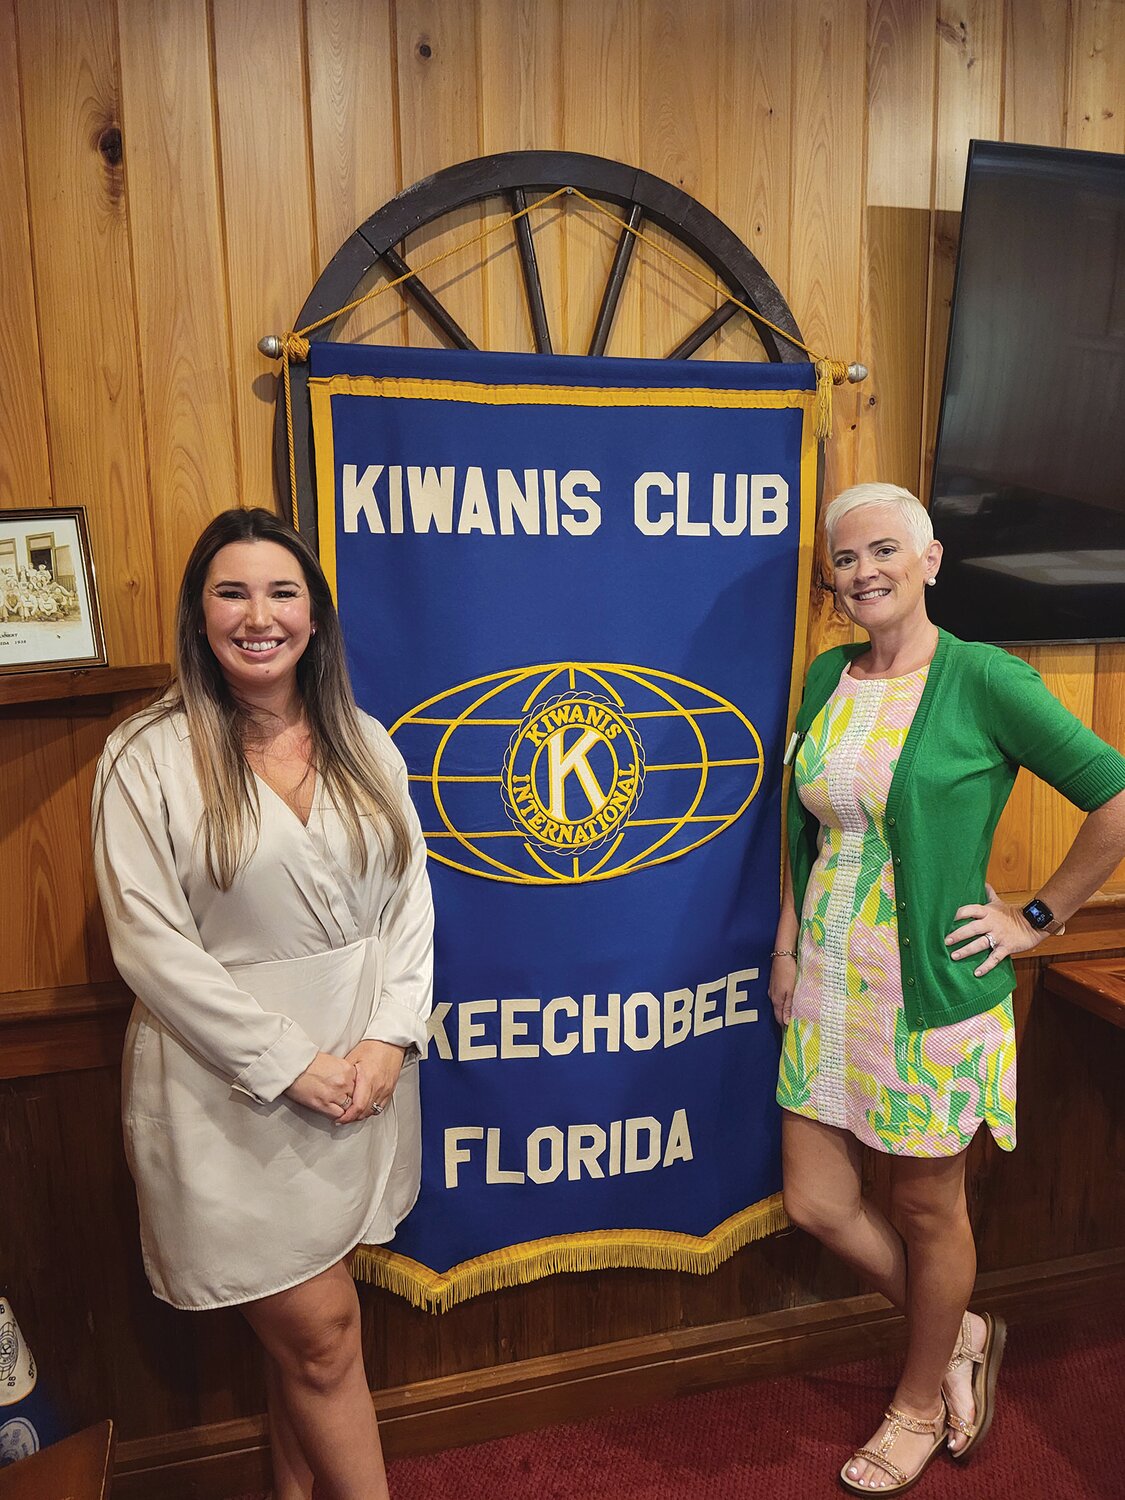 OKEECHOBEE -– Guest speaker Alaina Barron spoke to the Kiwanis Club about past, current and future projects of the Okeechobee Education Foundation. Left to right: Alaina Barron and Courtney Moyett.